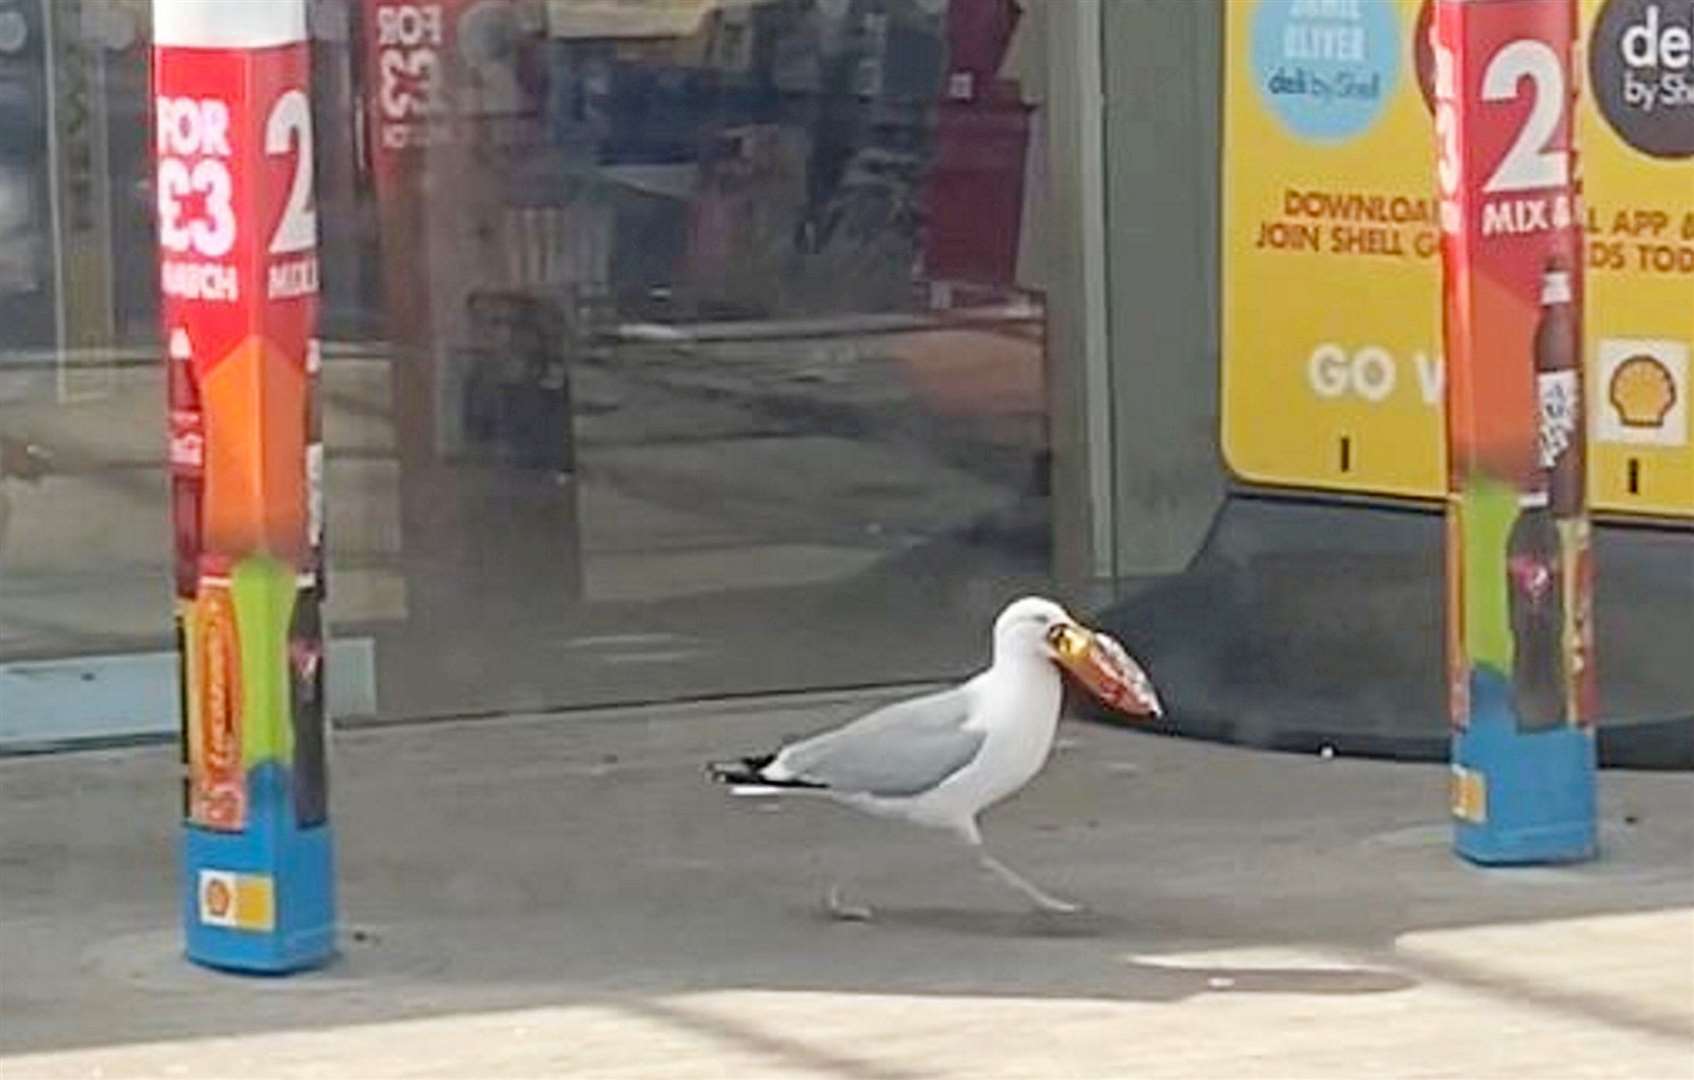 The cheeky seagull helped himself to a packet of crisps. Picture: Kirsty Fattore